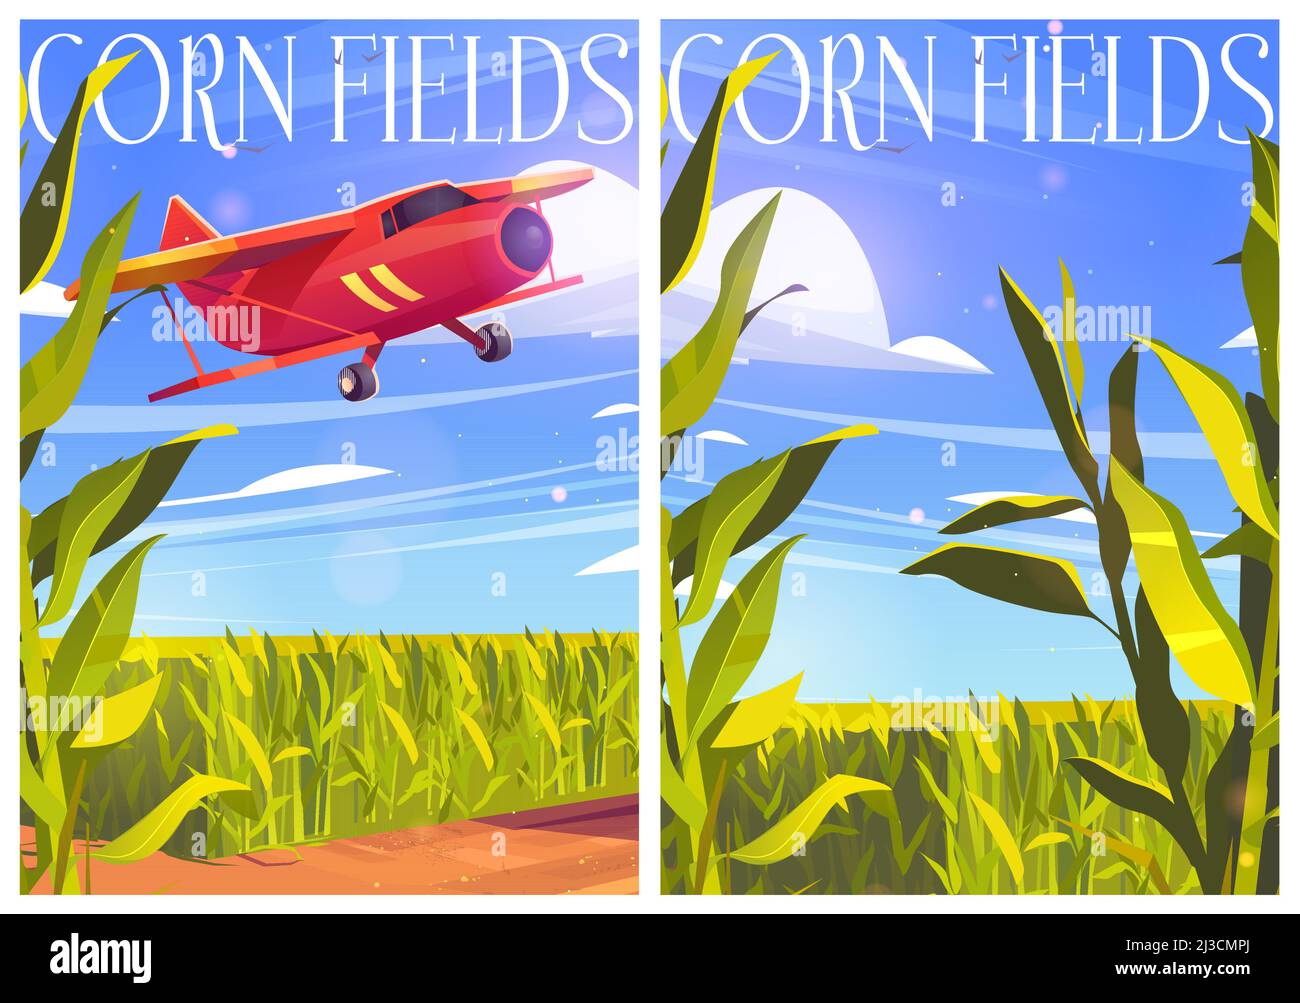 Corn fields posters with red airplane and green cereal plants. Vector cartoon banners with agriculture cornfield and biplane in sky. Farmland with pla Stock Vector